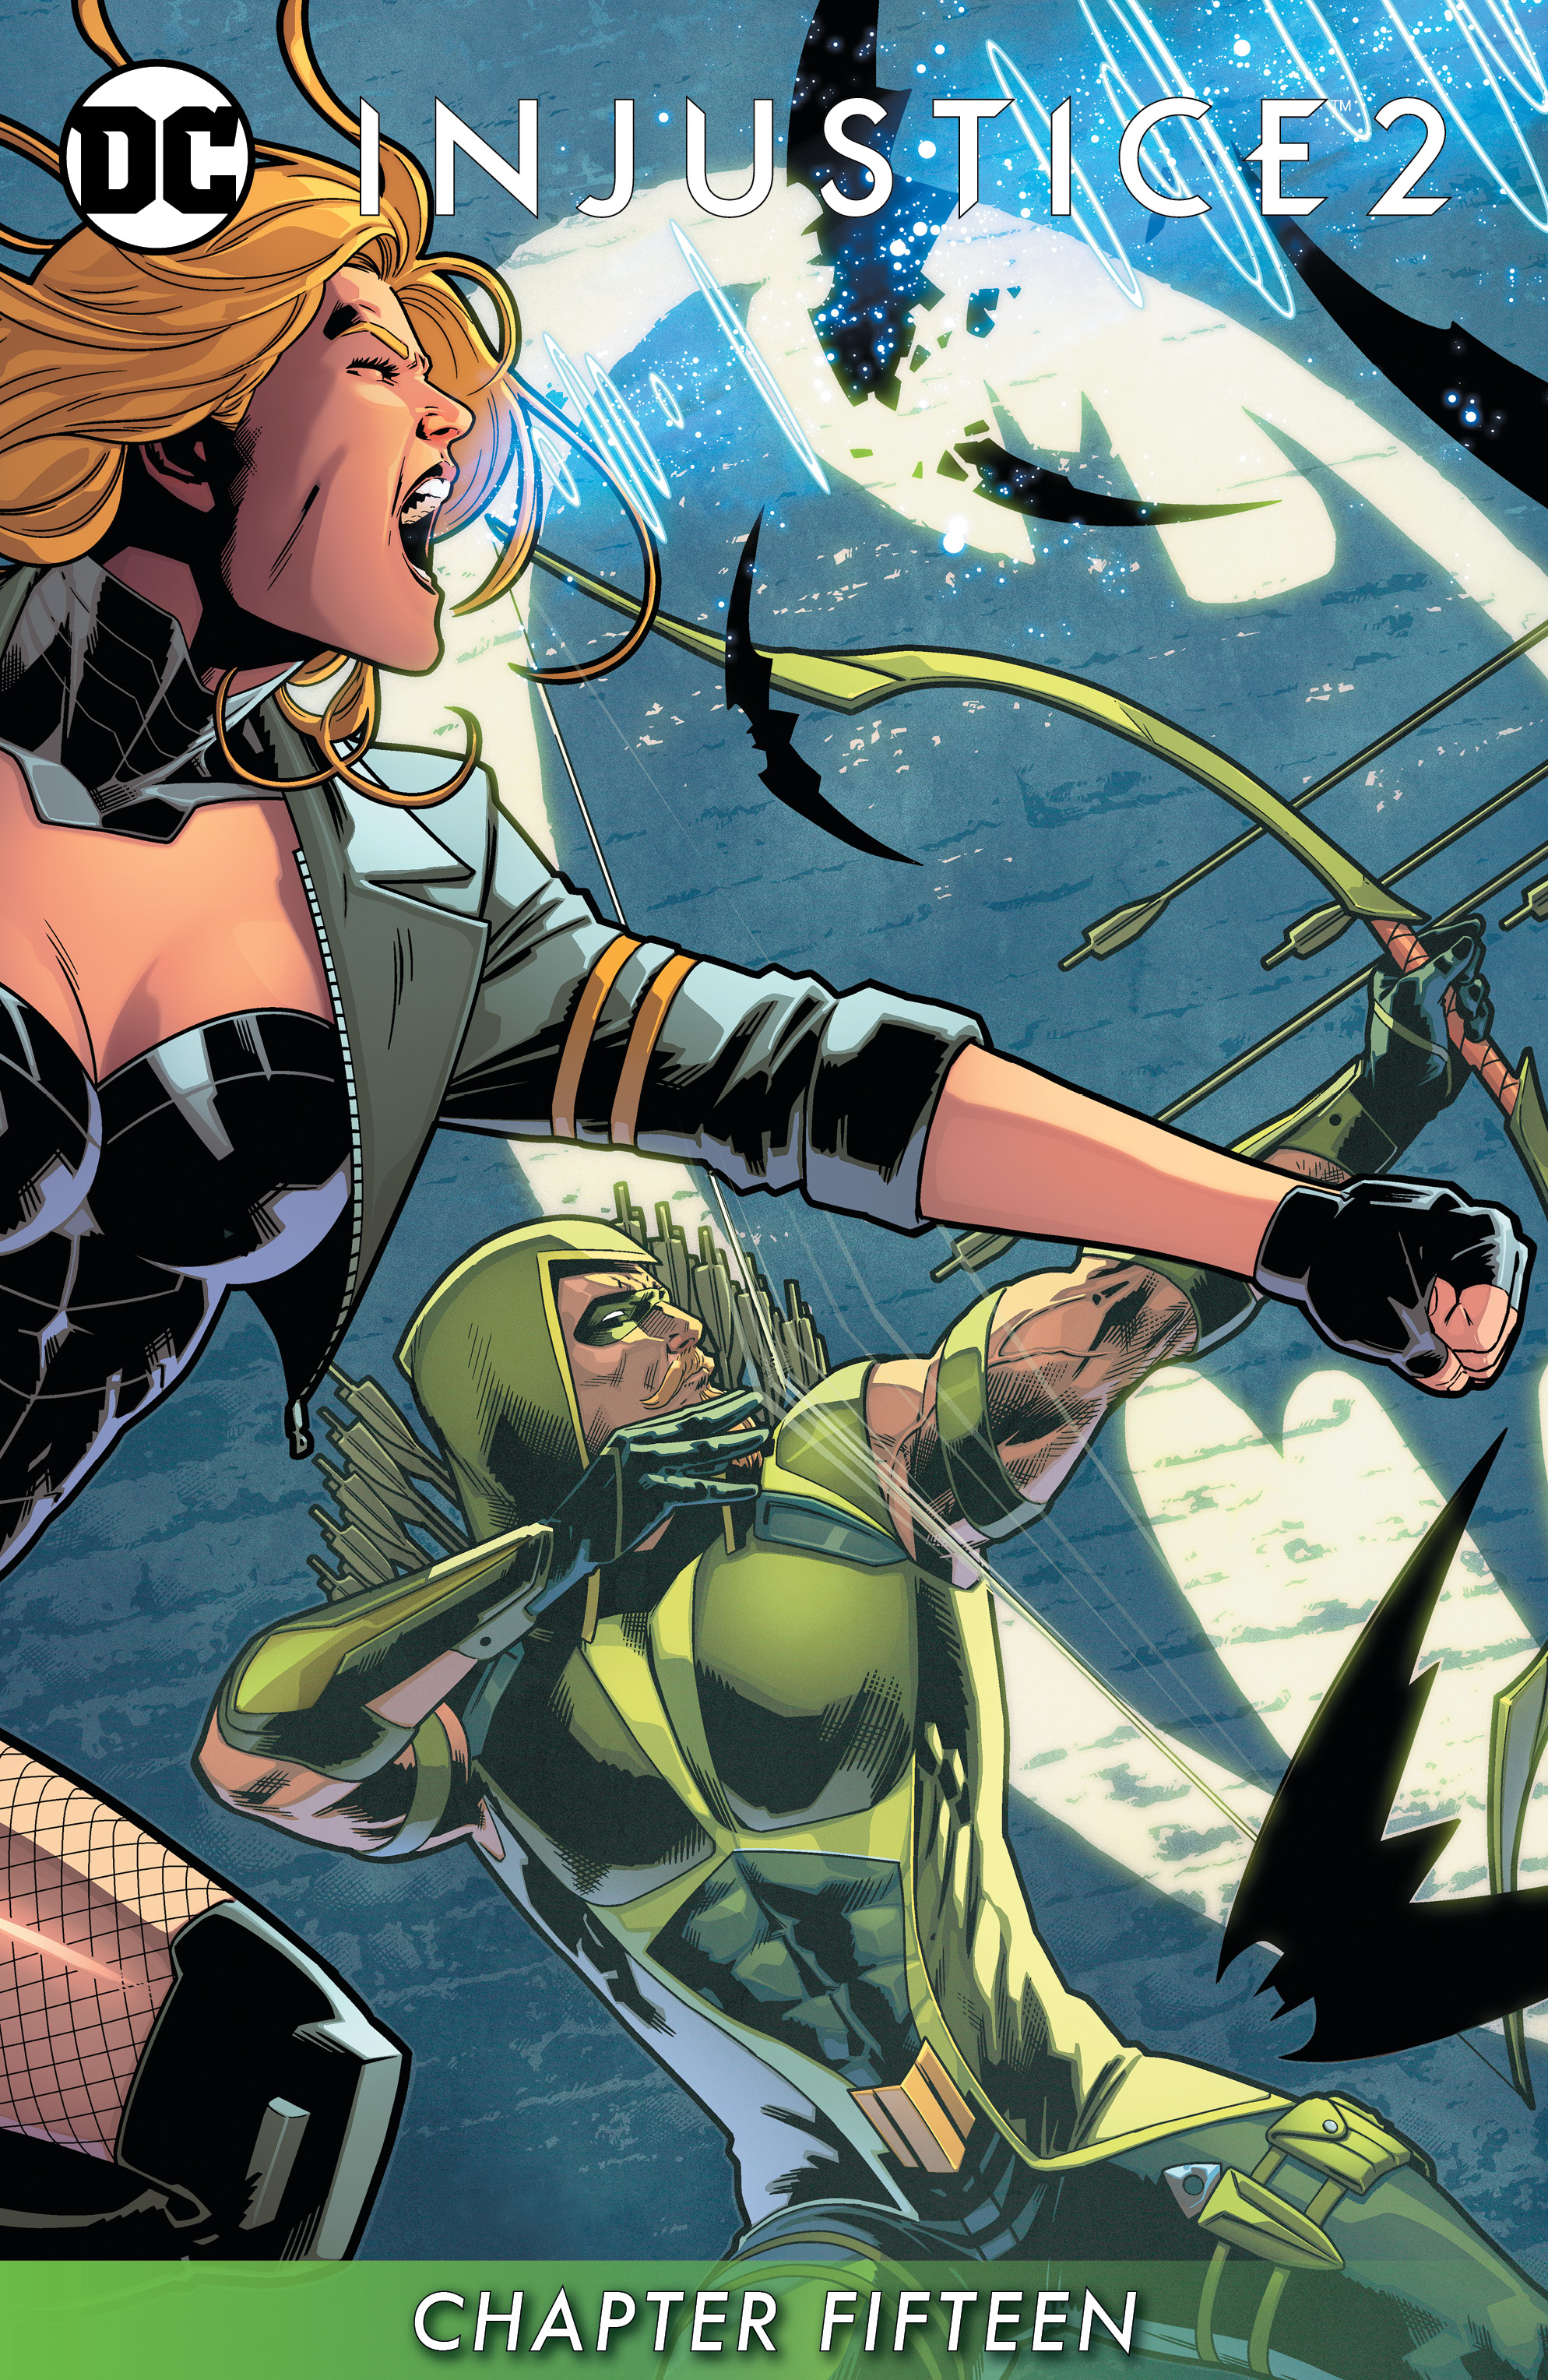 Injustice 2 #15 preview images